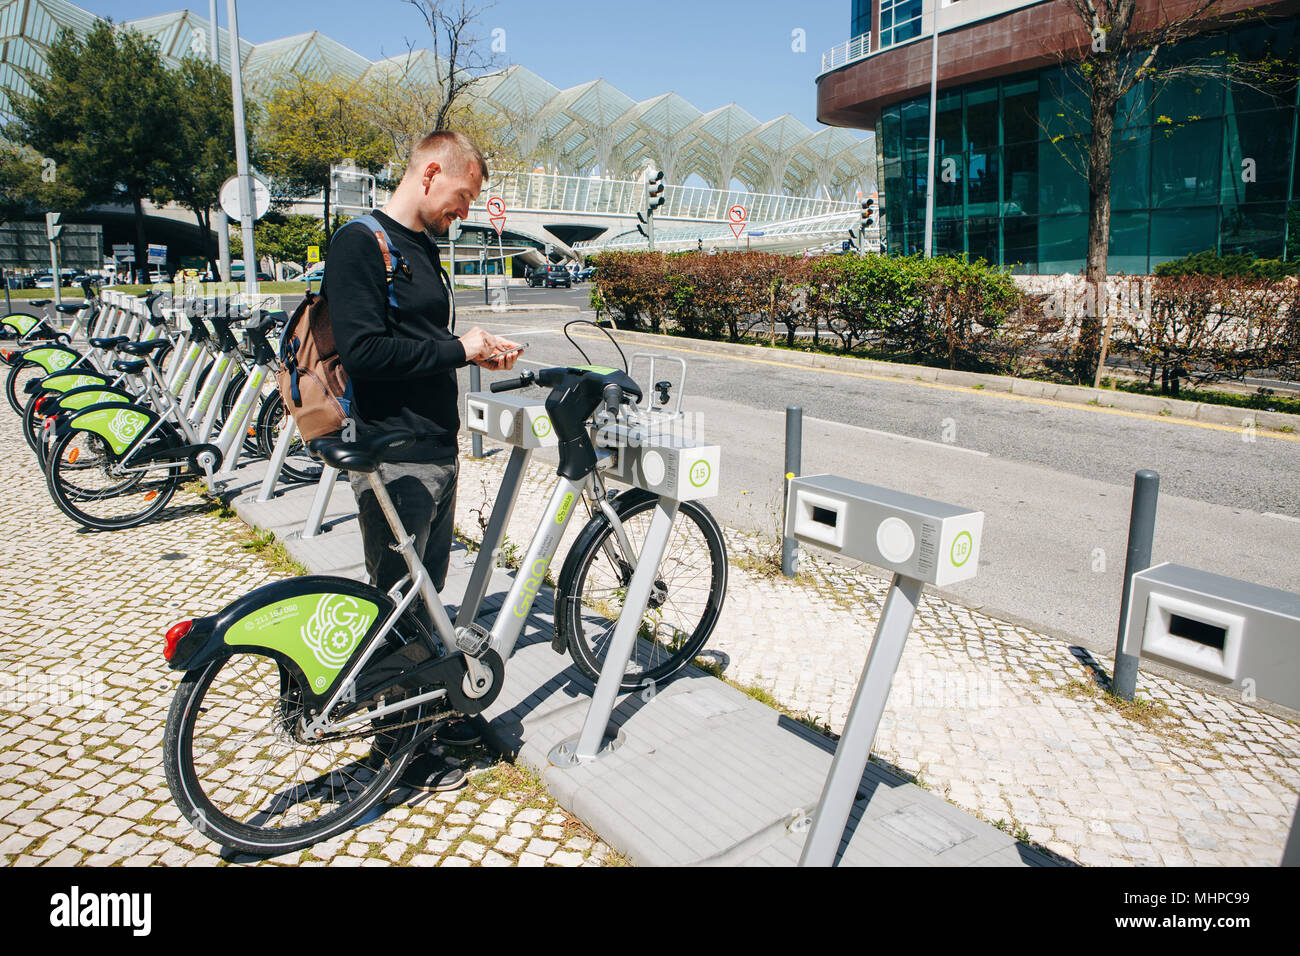 Portugal, Lisbon 29 april 2018: man rents bicycle using the mobile app on your phone Stock Photo